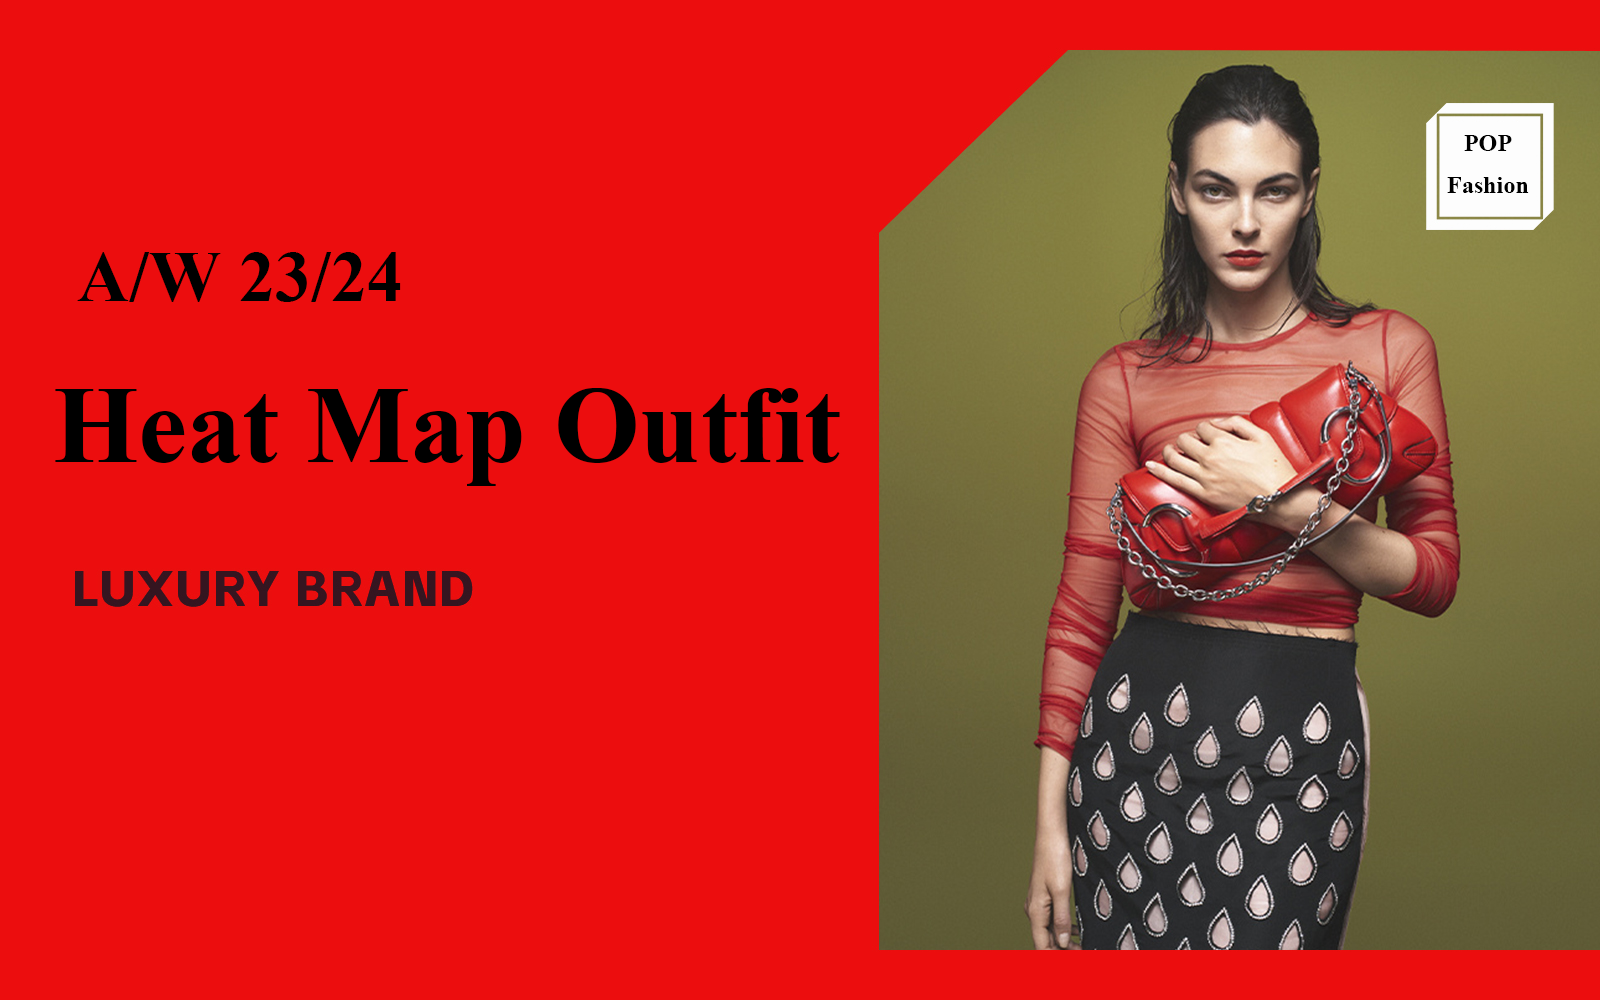 Heat Map Outfit -- The Comprehensive Analysis of Luxury Brand